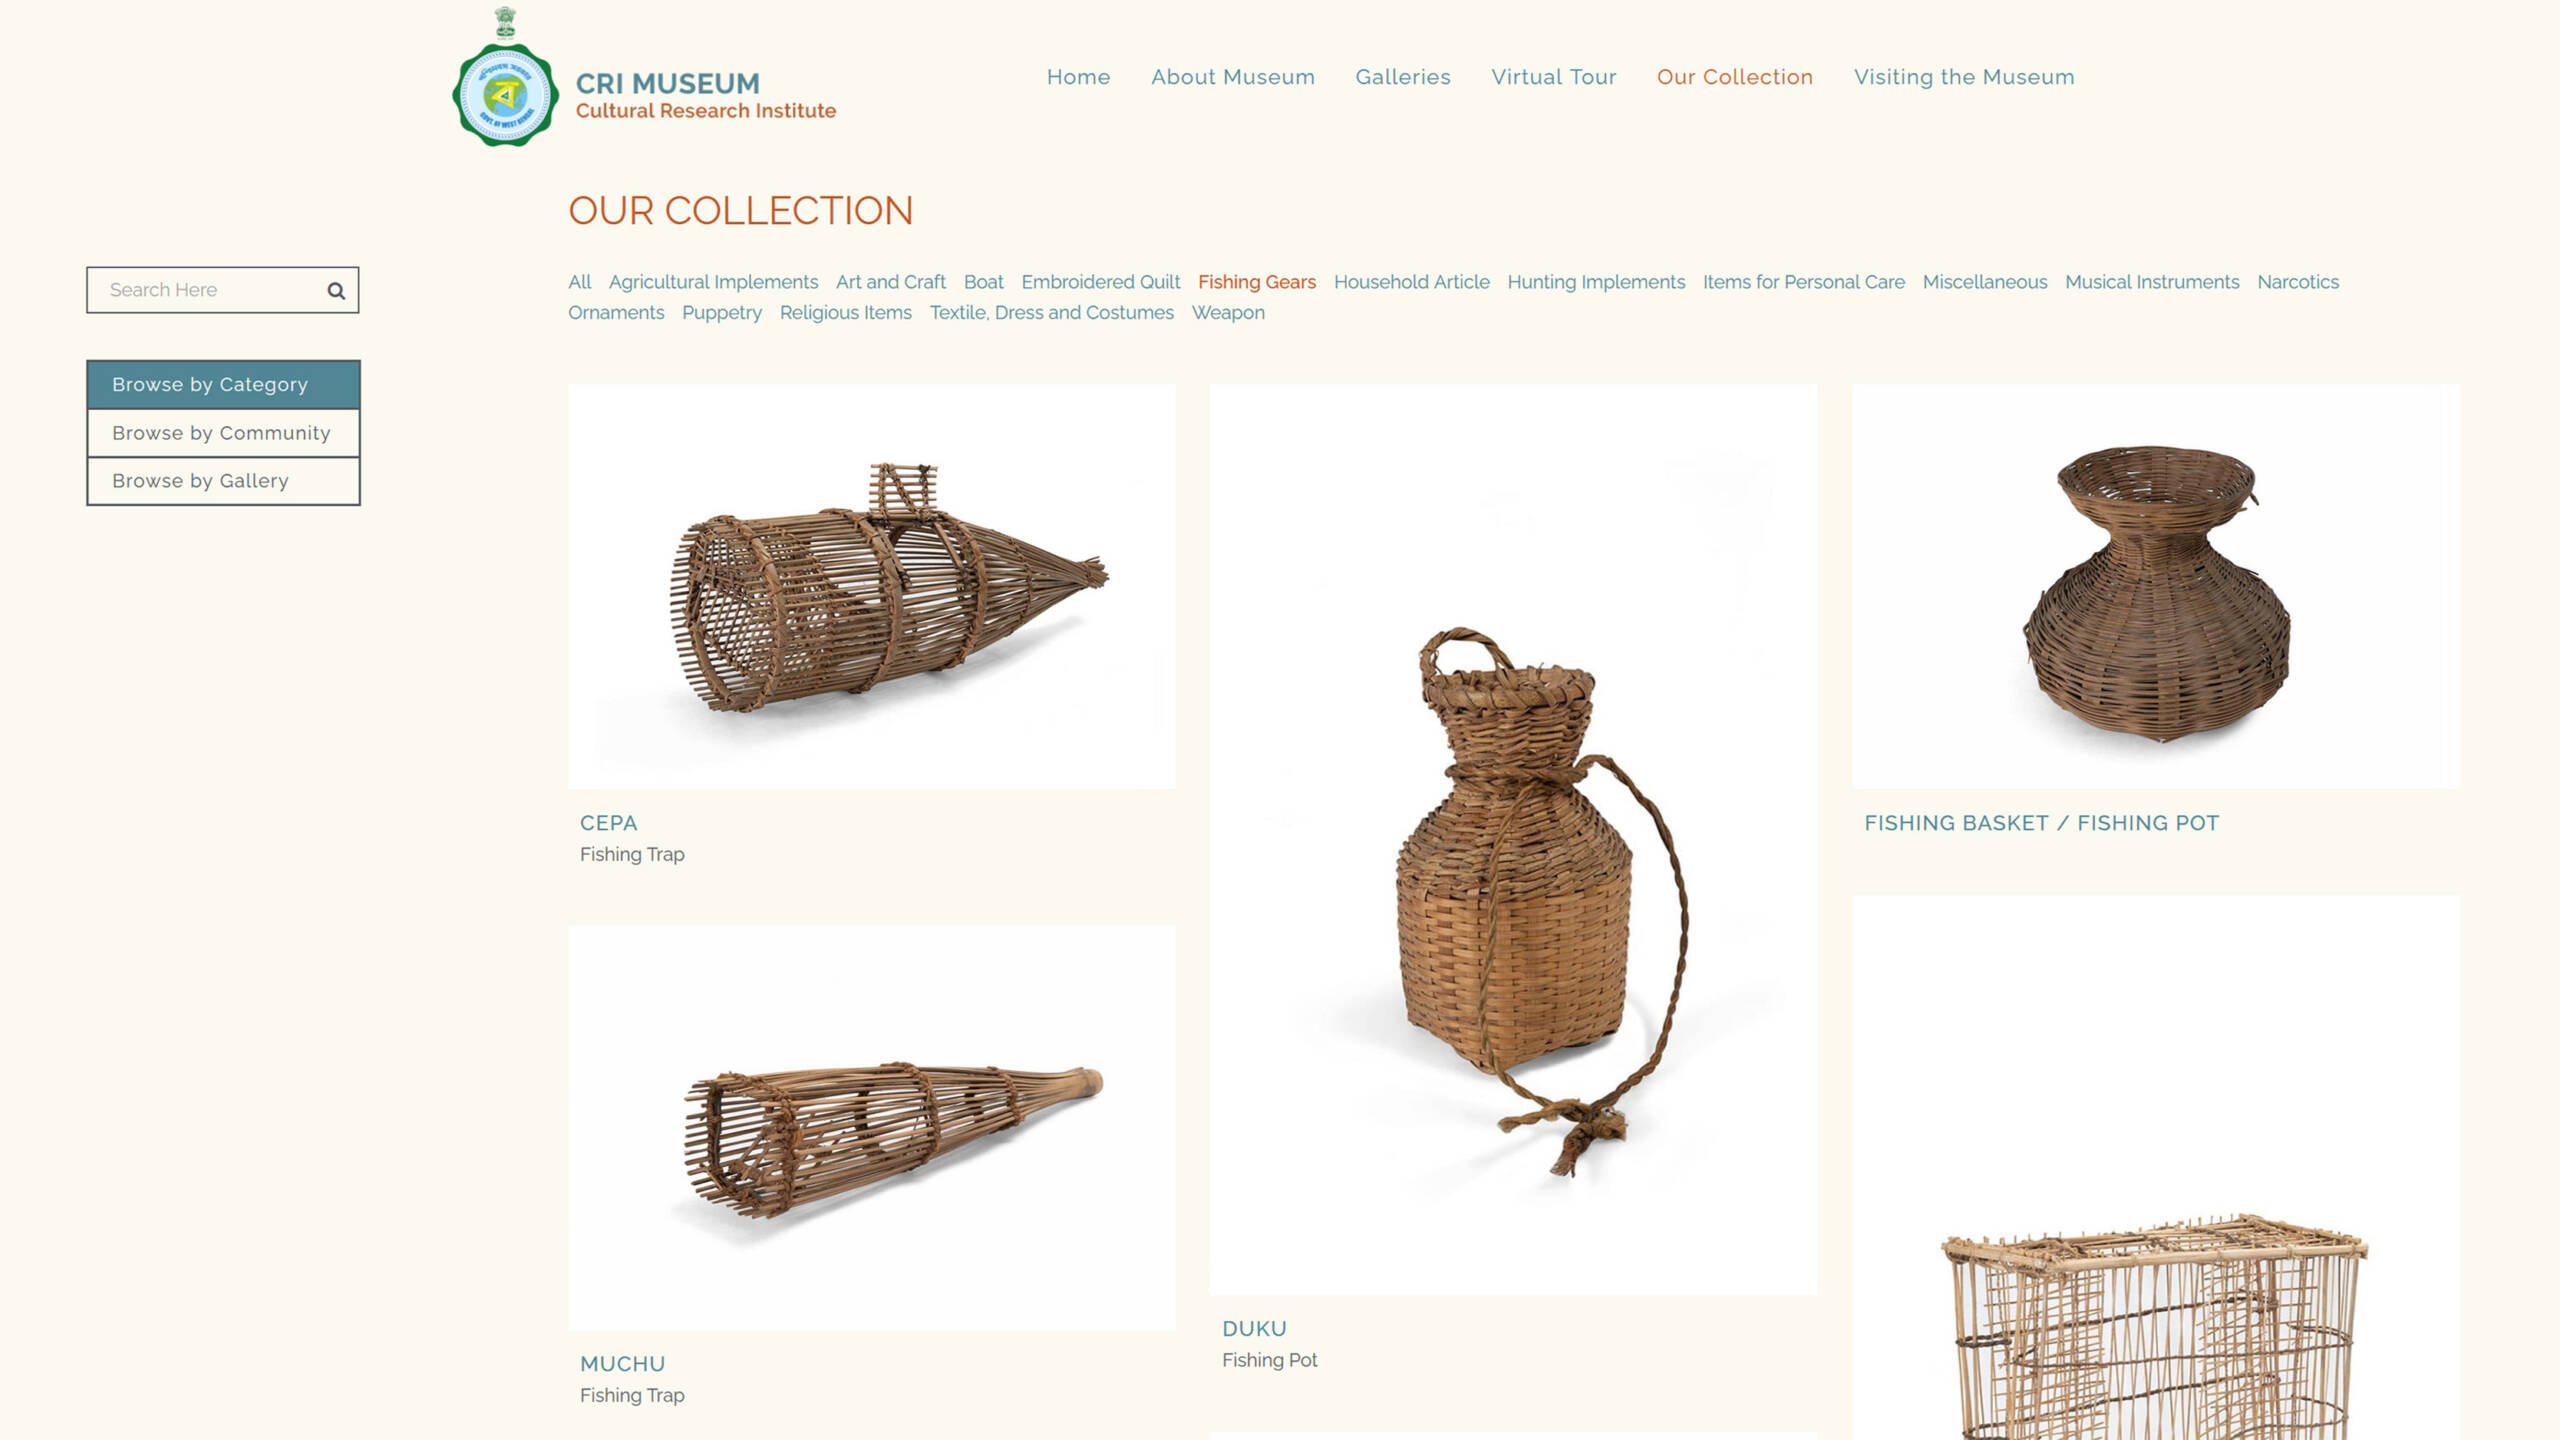 Our Collection page of the website of CRI museum